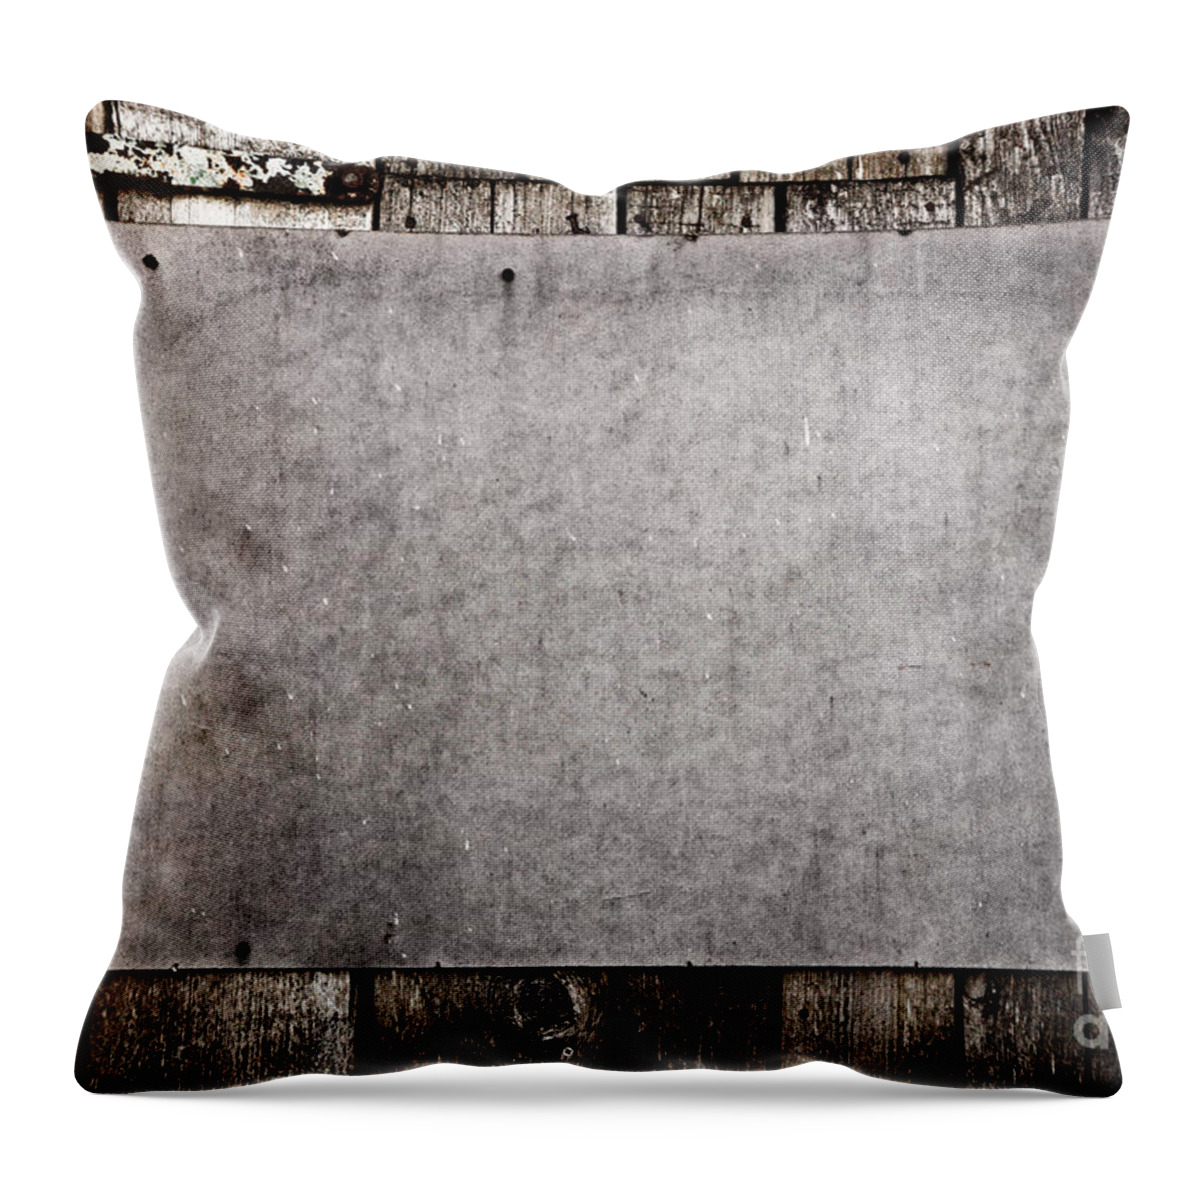 Grunge Throw Pillow featuring the photograph Old grunge plywood board on a wooden wall by Michal Bednarek